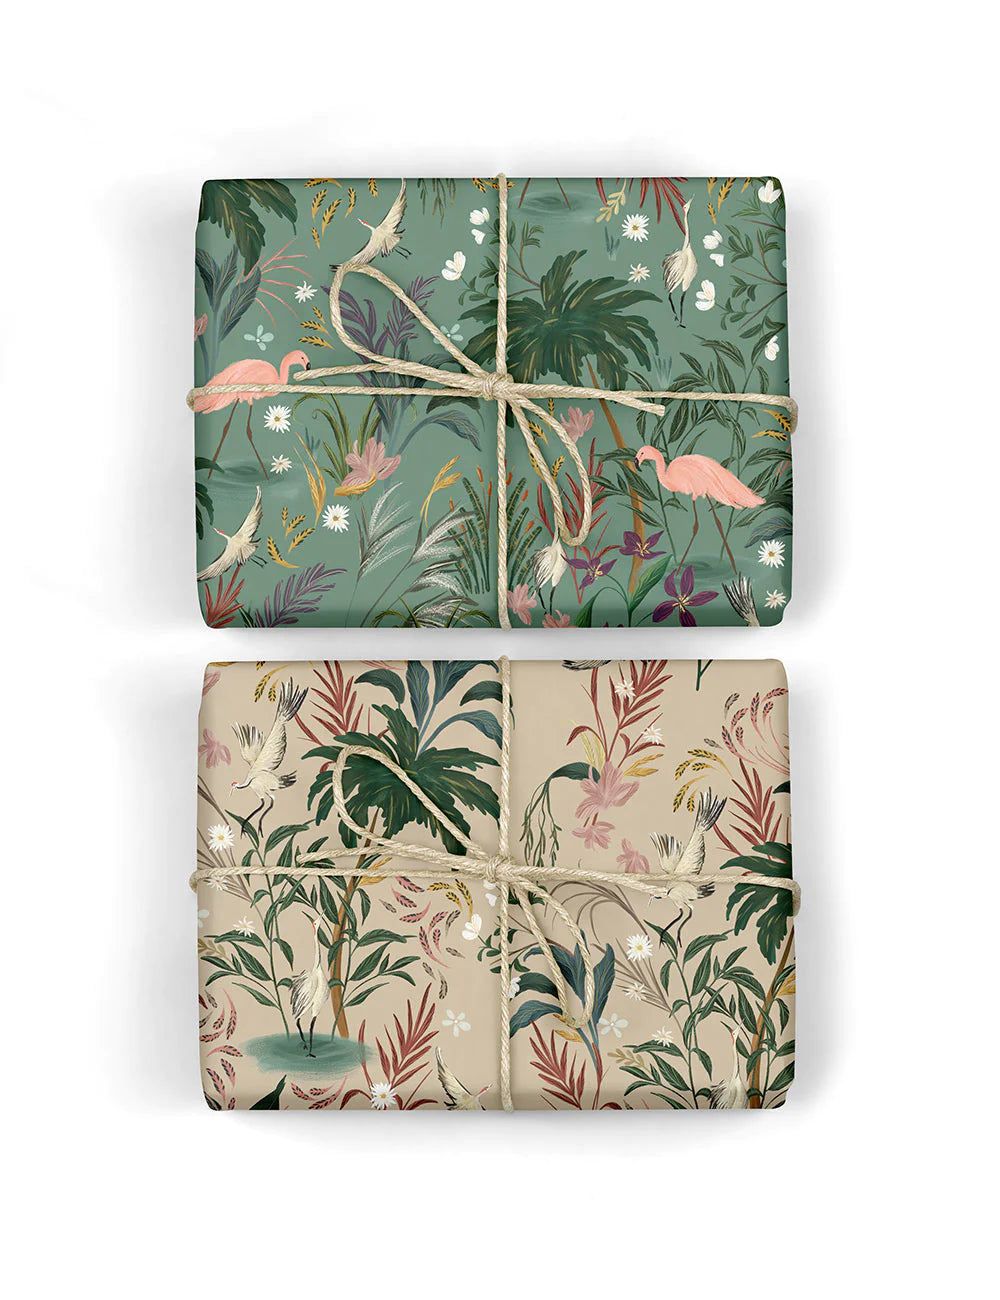 Flamingos / Herons Double Sided Gift Wrap